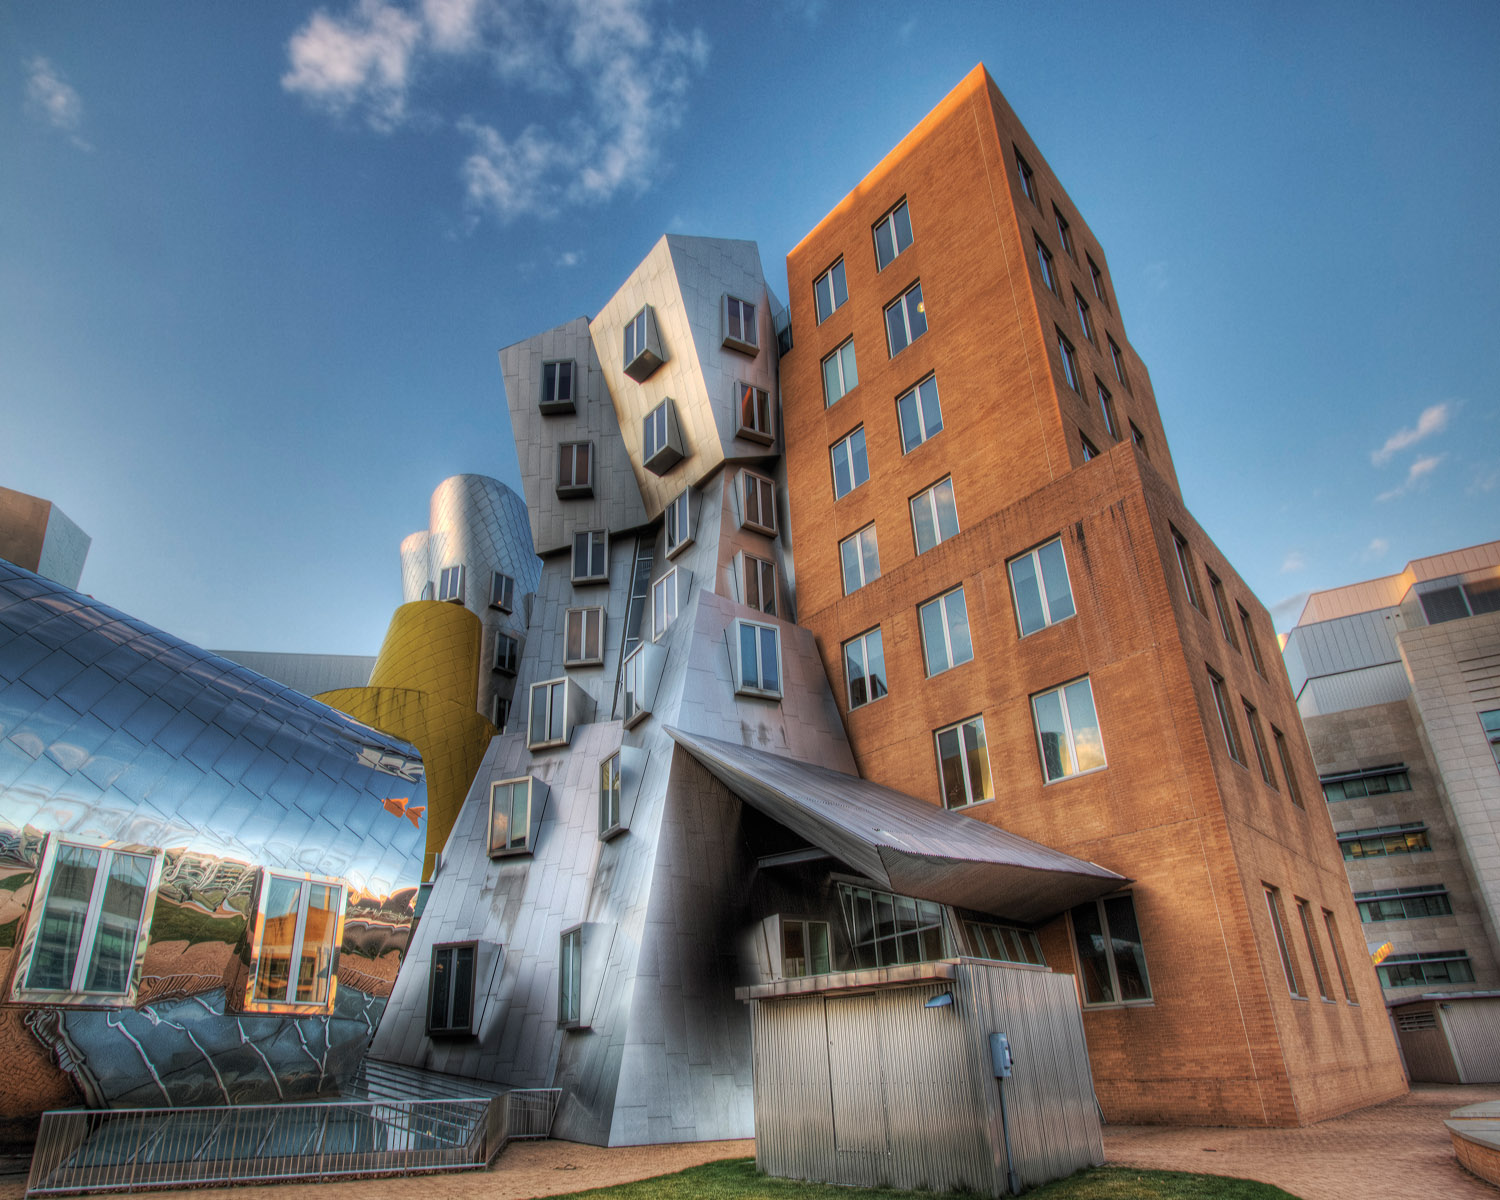 MIT Stata Center building where Design 4 Drupal is taking place in 2019